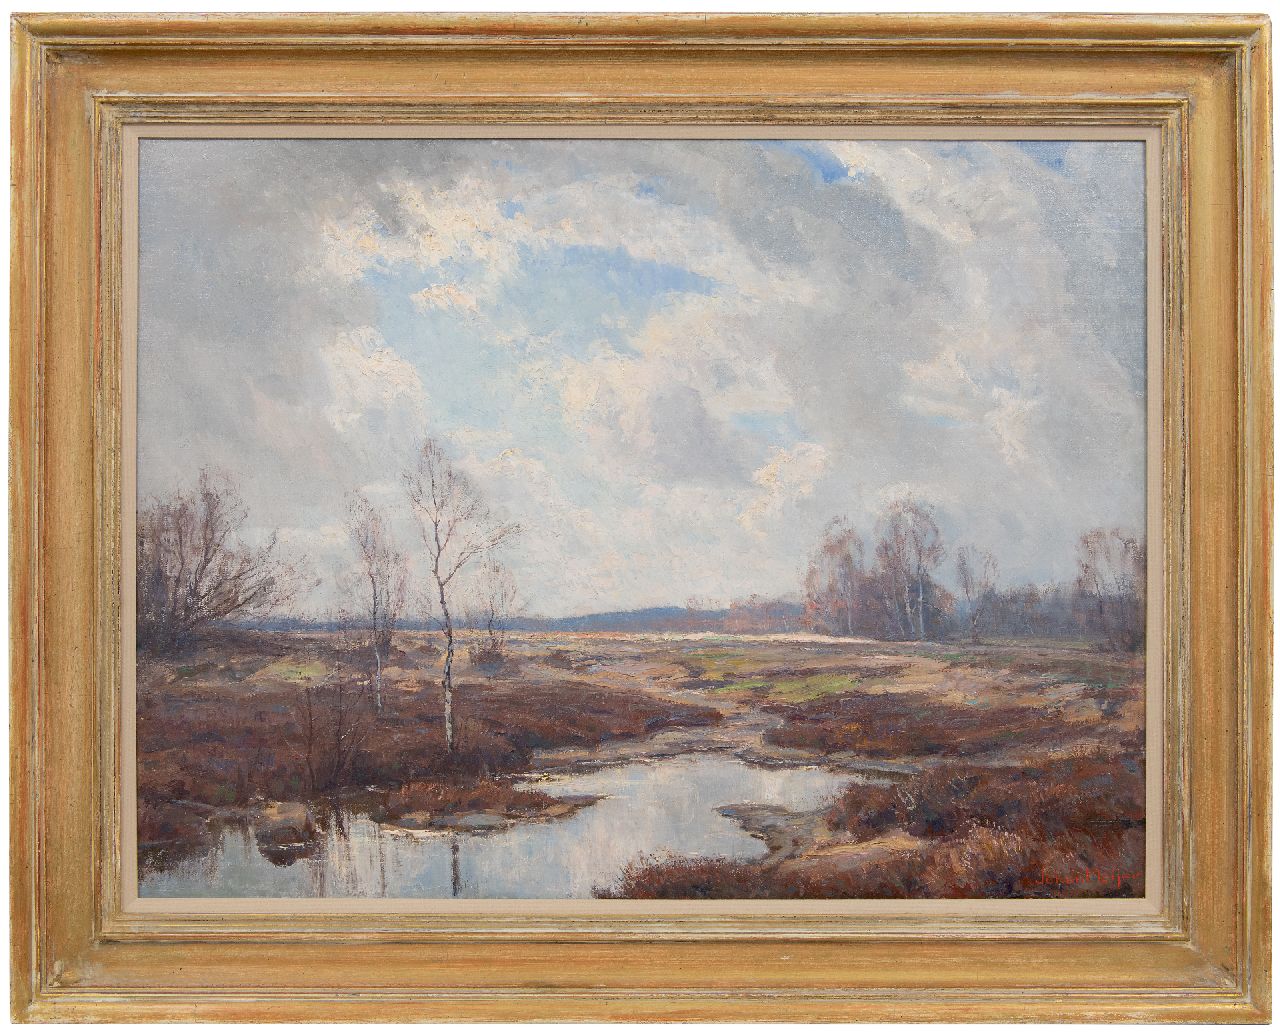 Meijer J.  | Johannes 'Johan' Meijer | Paintings offered for sale | Heatland pool, oil on canvas 61.1 x 81.4 cm, signed l.r. and on the reverse